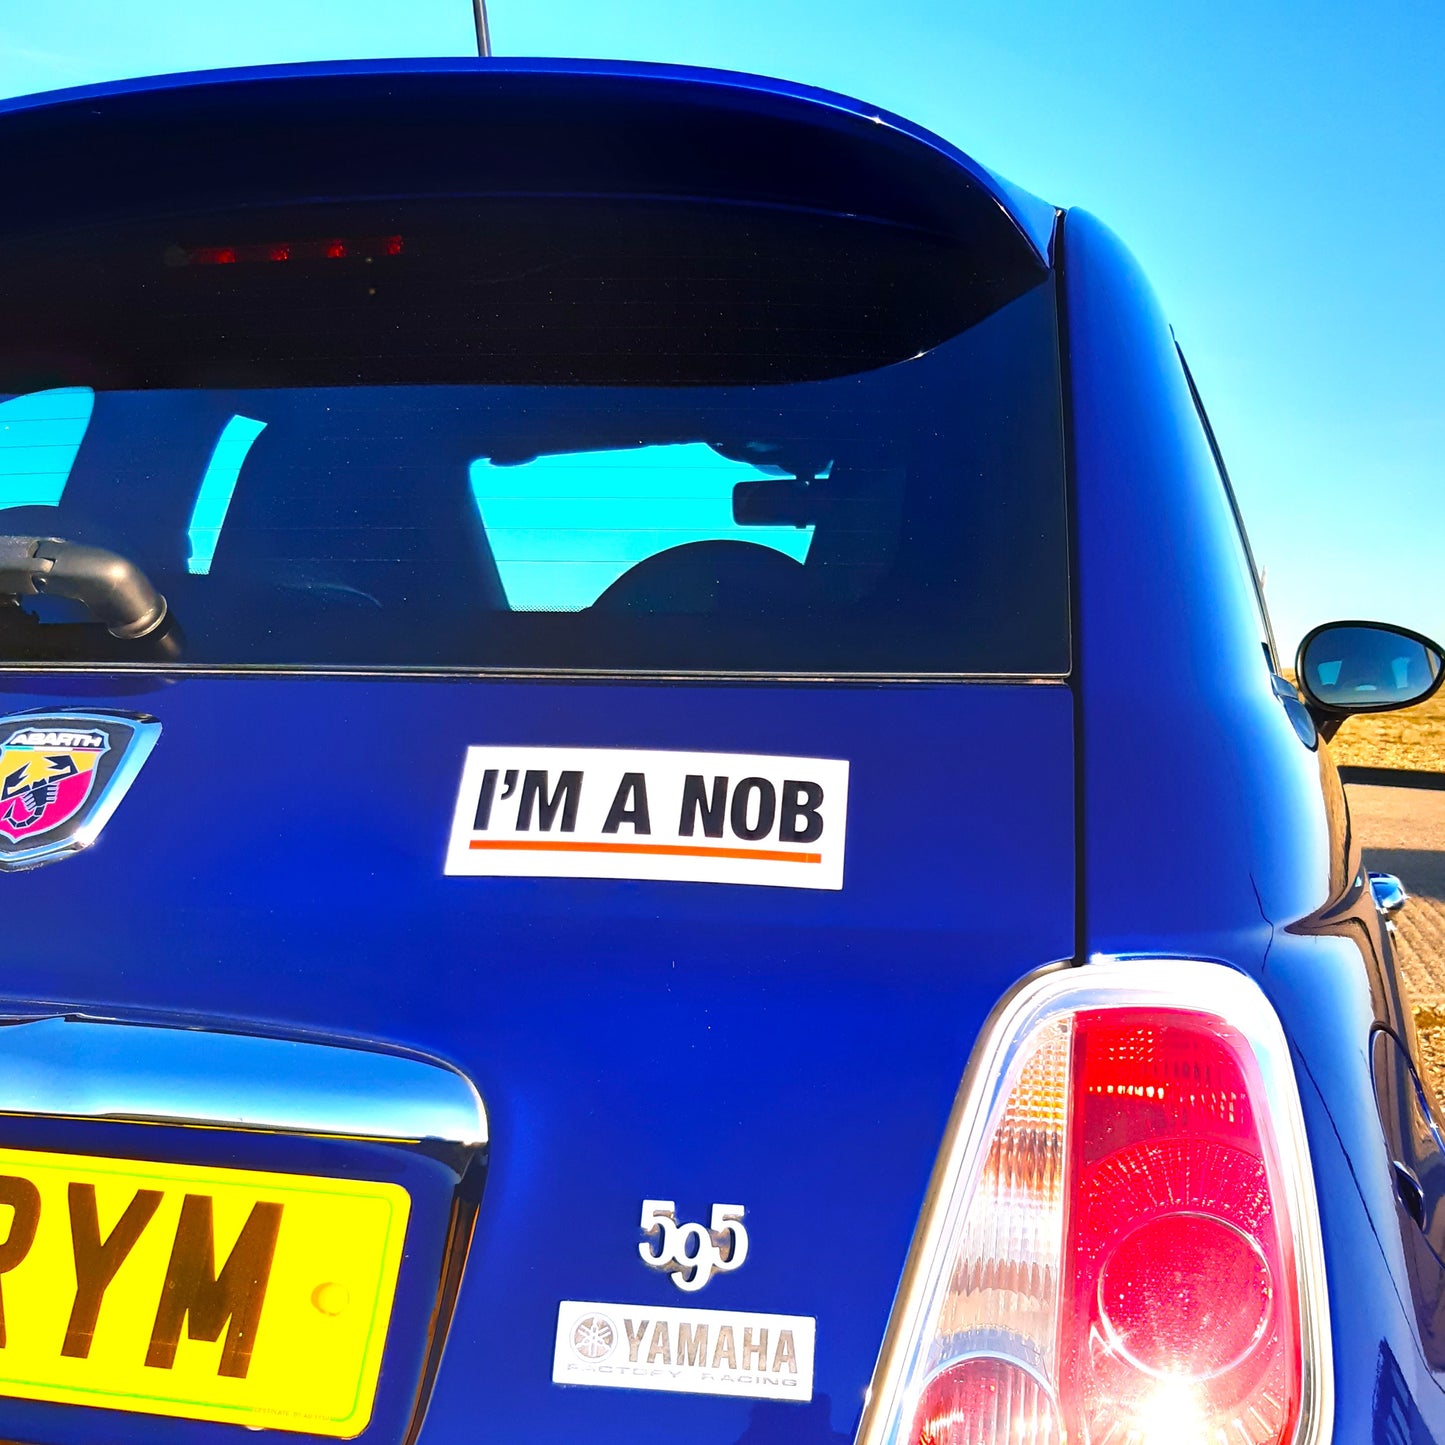 2 Joke Magnetic Car Stickers With "I'M A NOB"